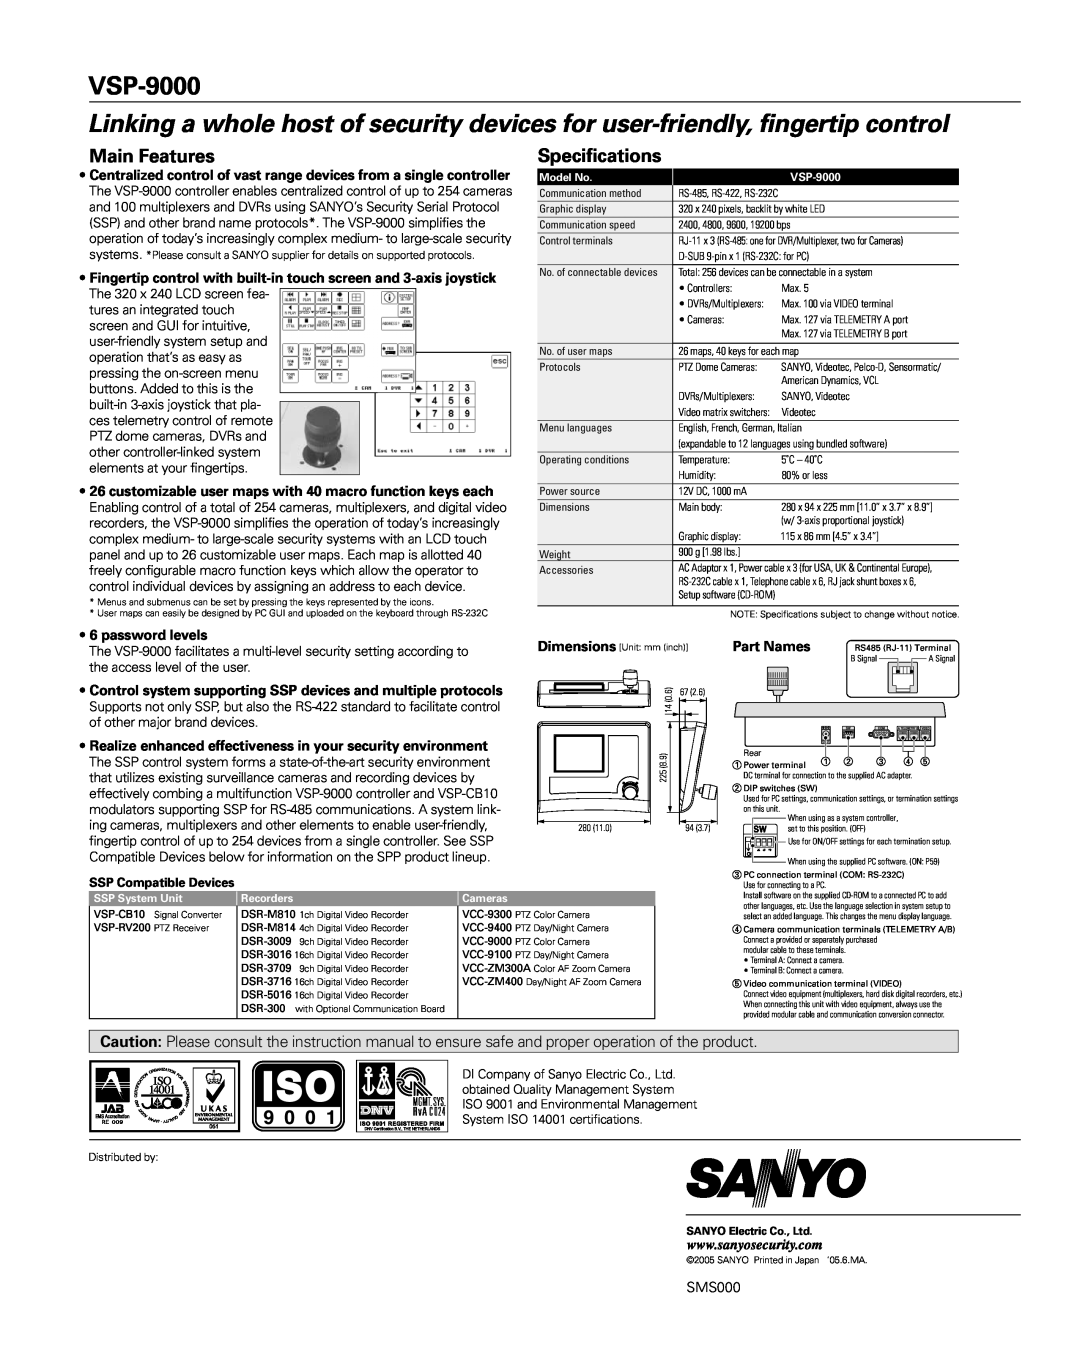 Sanyo VSP-9000 manual Main Features, Specifications, password levels, Part Names, SMS000, SSP Compatible Devices 